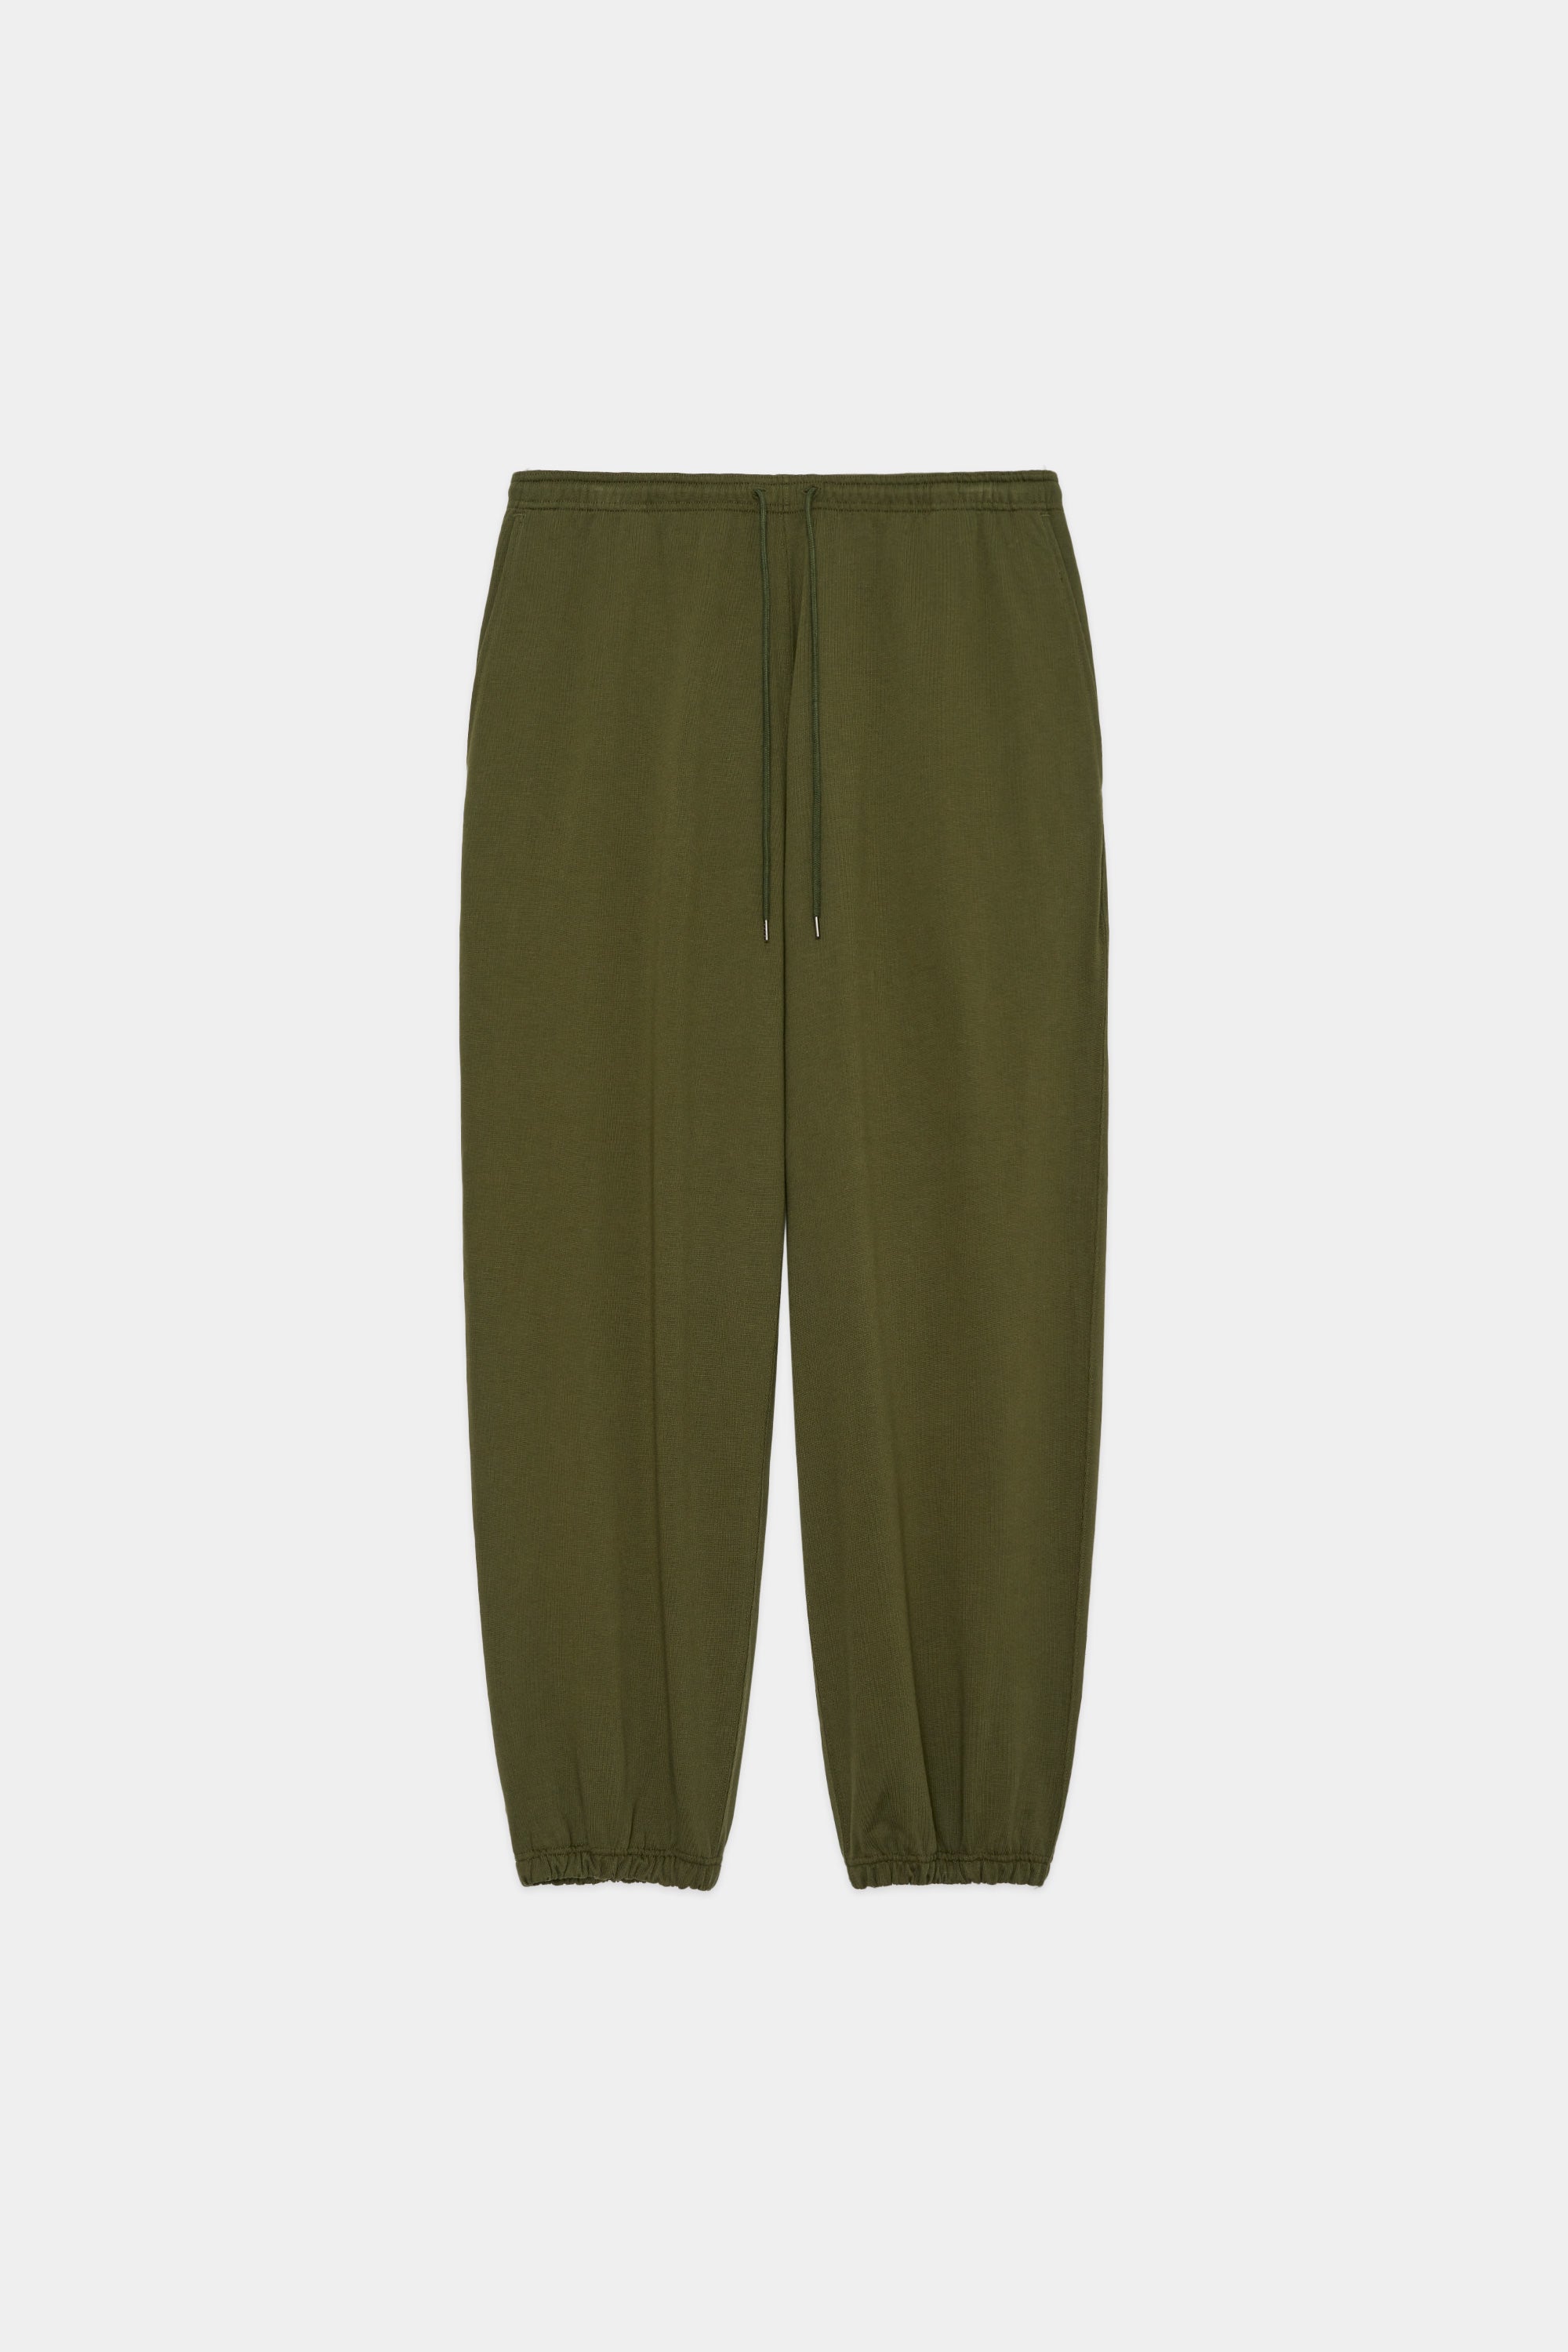 20//1 RECYCLE SUVIN ORGANIC COTTON KNIT EASY PANTS WIDE, Olive